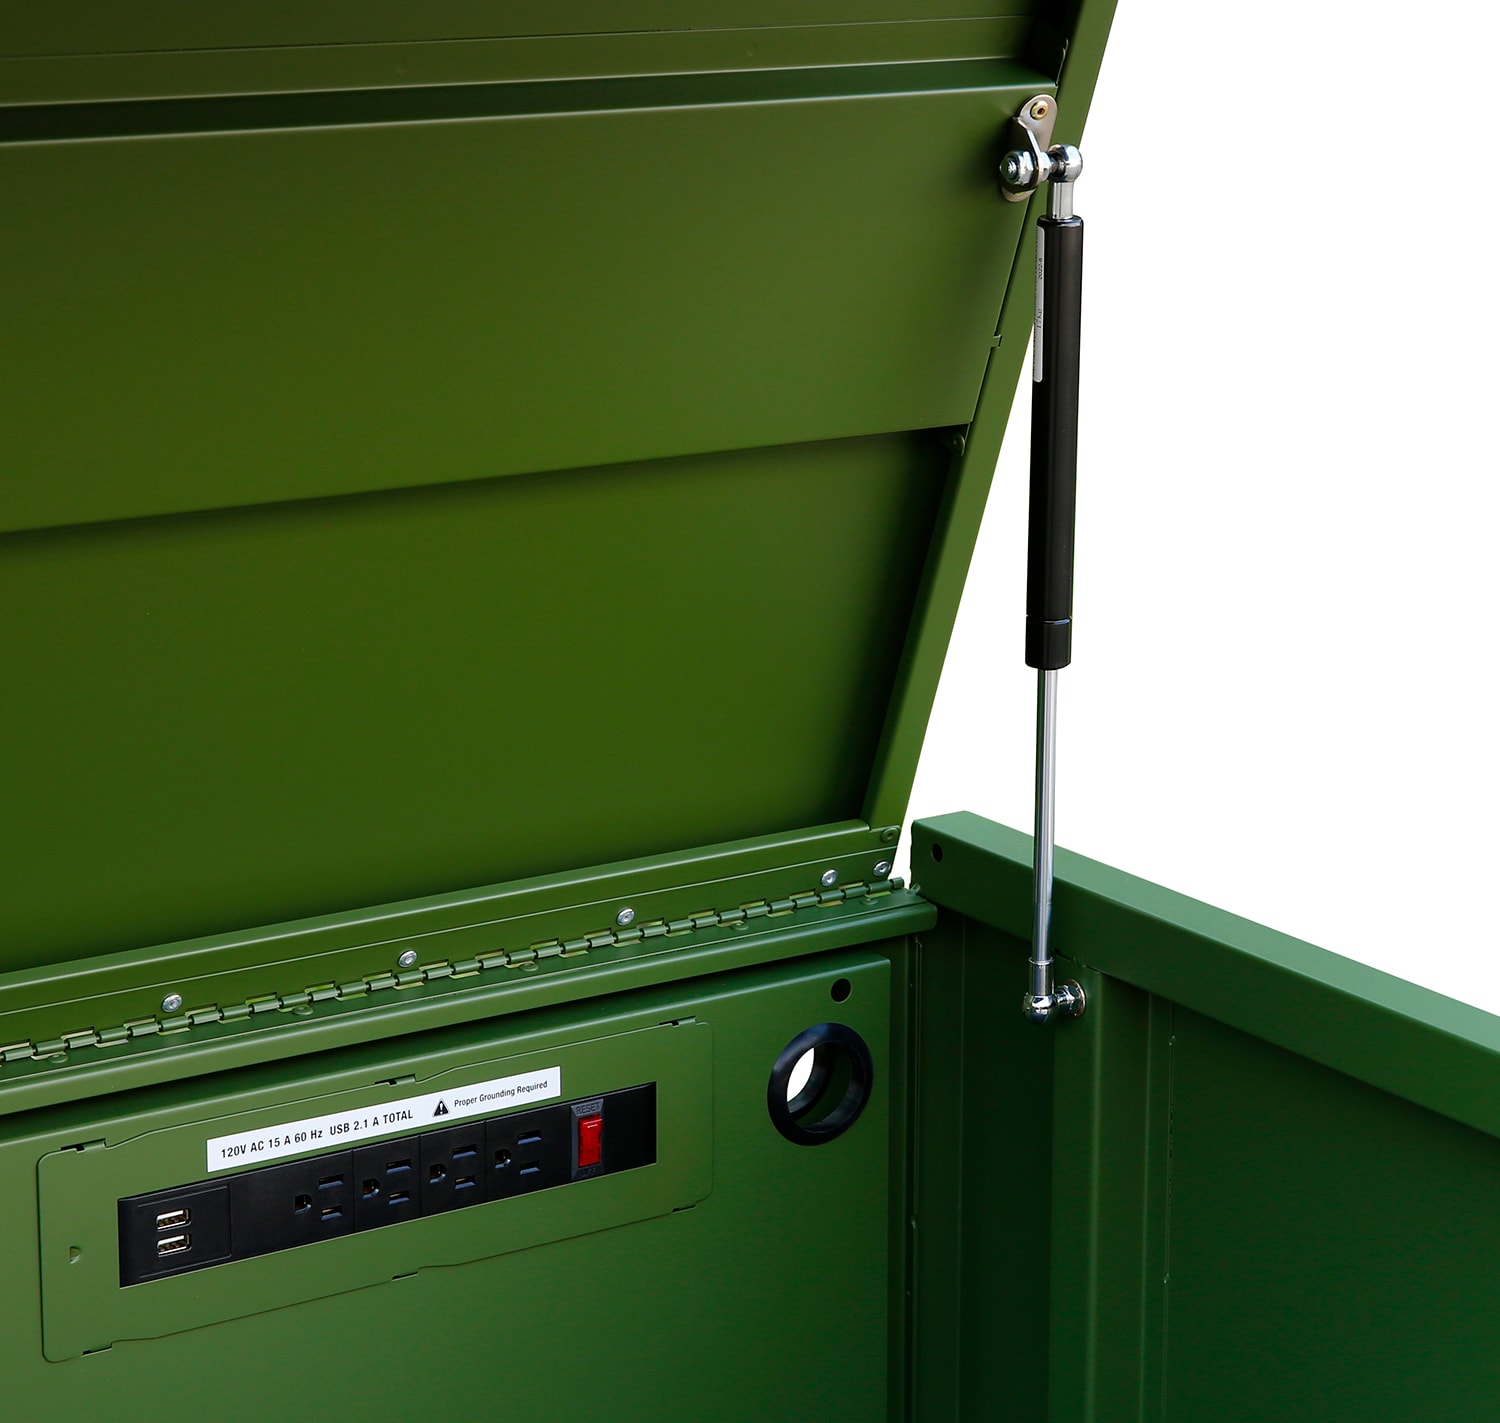 Shop Viper Tool Storage Viper 41-Inch Top and Bottom Steel Rolling Cabinet  Combo Army Green at